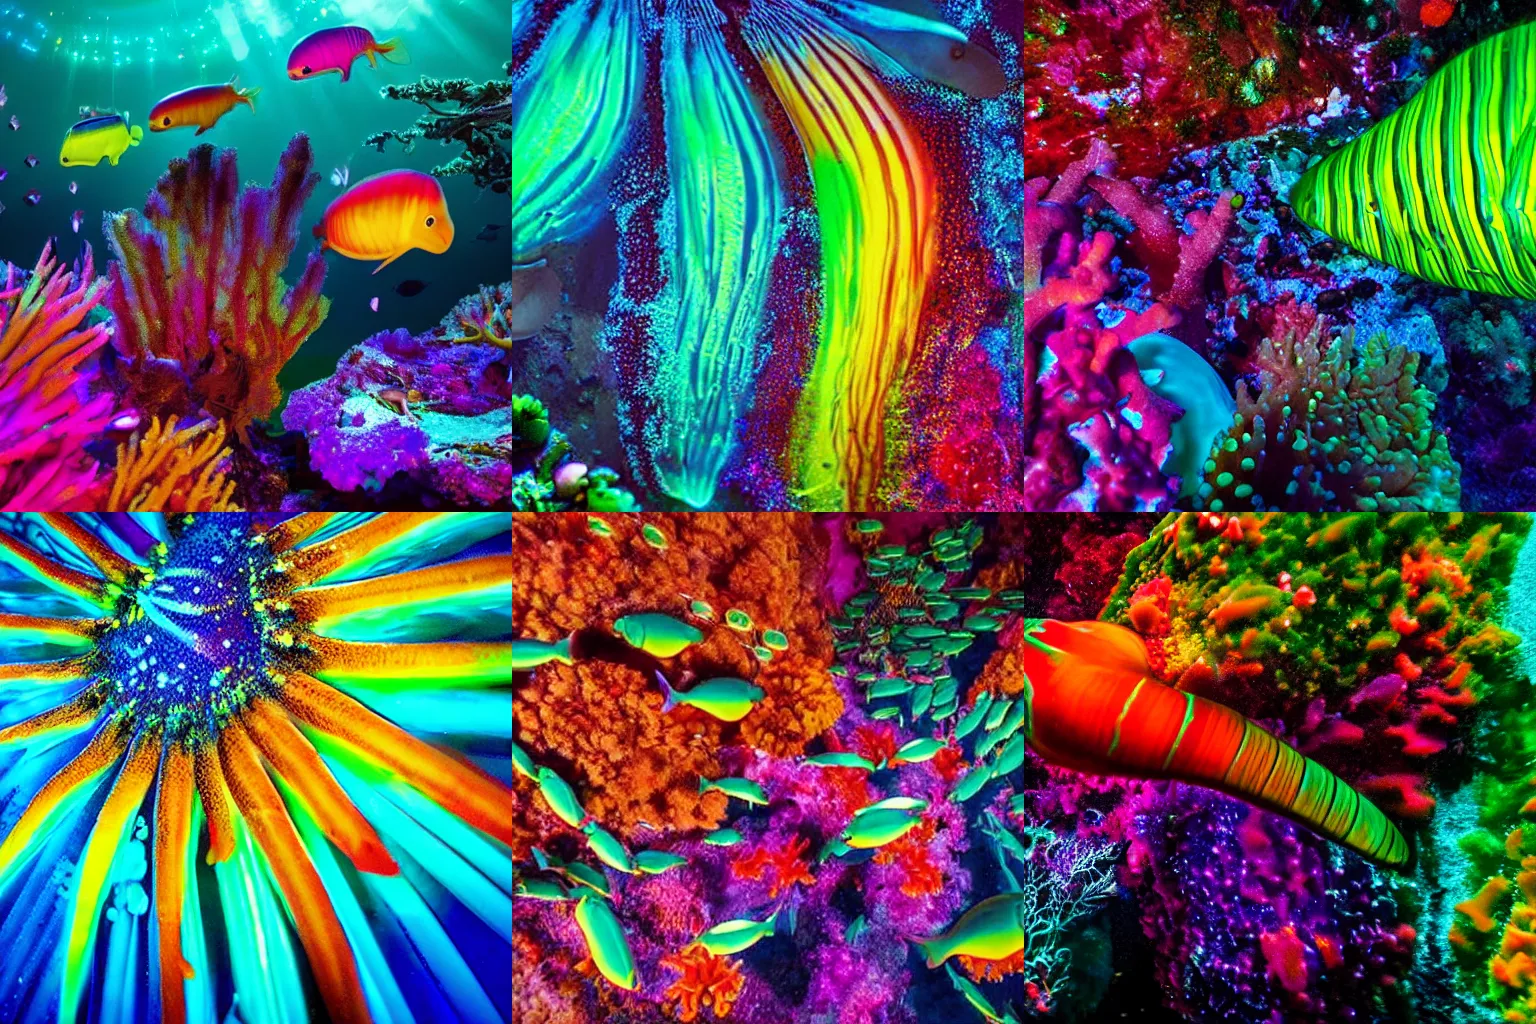 Prompt: most colorful image ever filmed of marine life, national geographic award winning photo, dazzling sea creatures with bioluminescence in every color of the rainbow